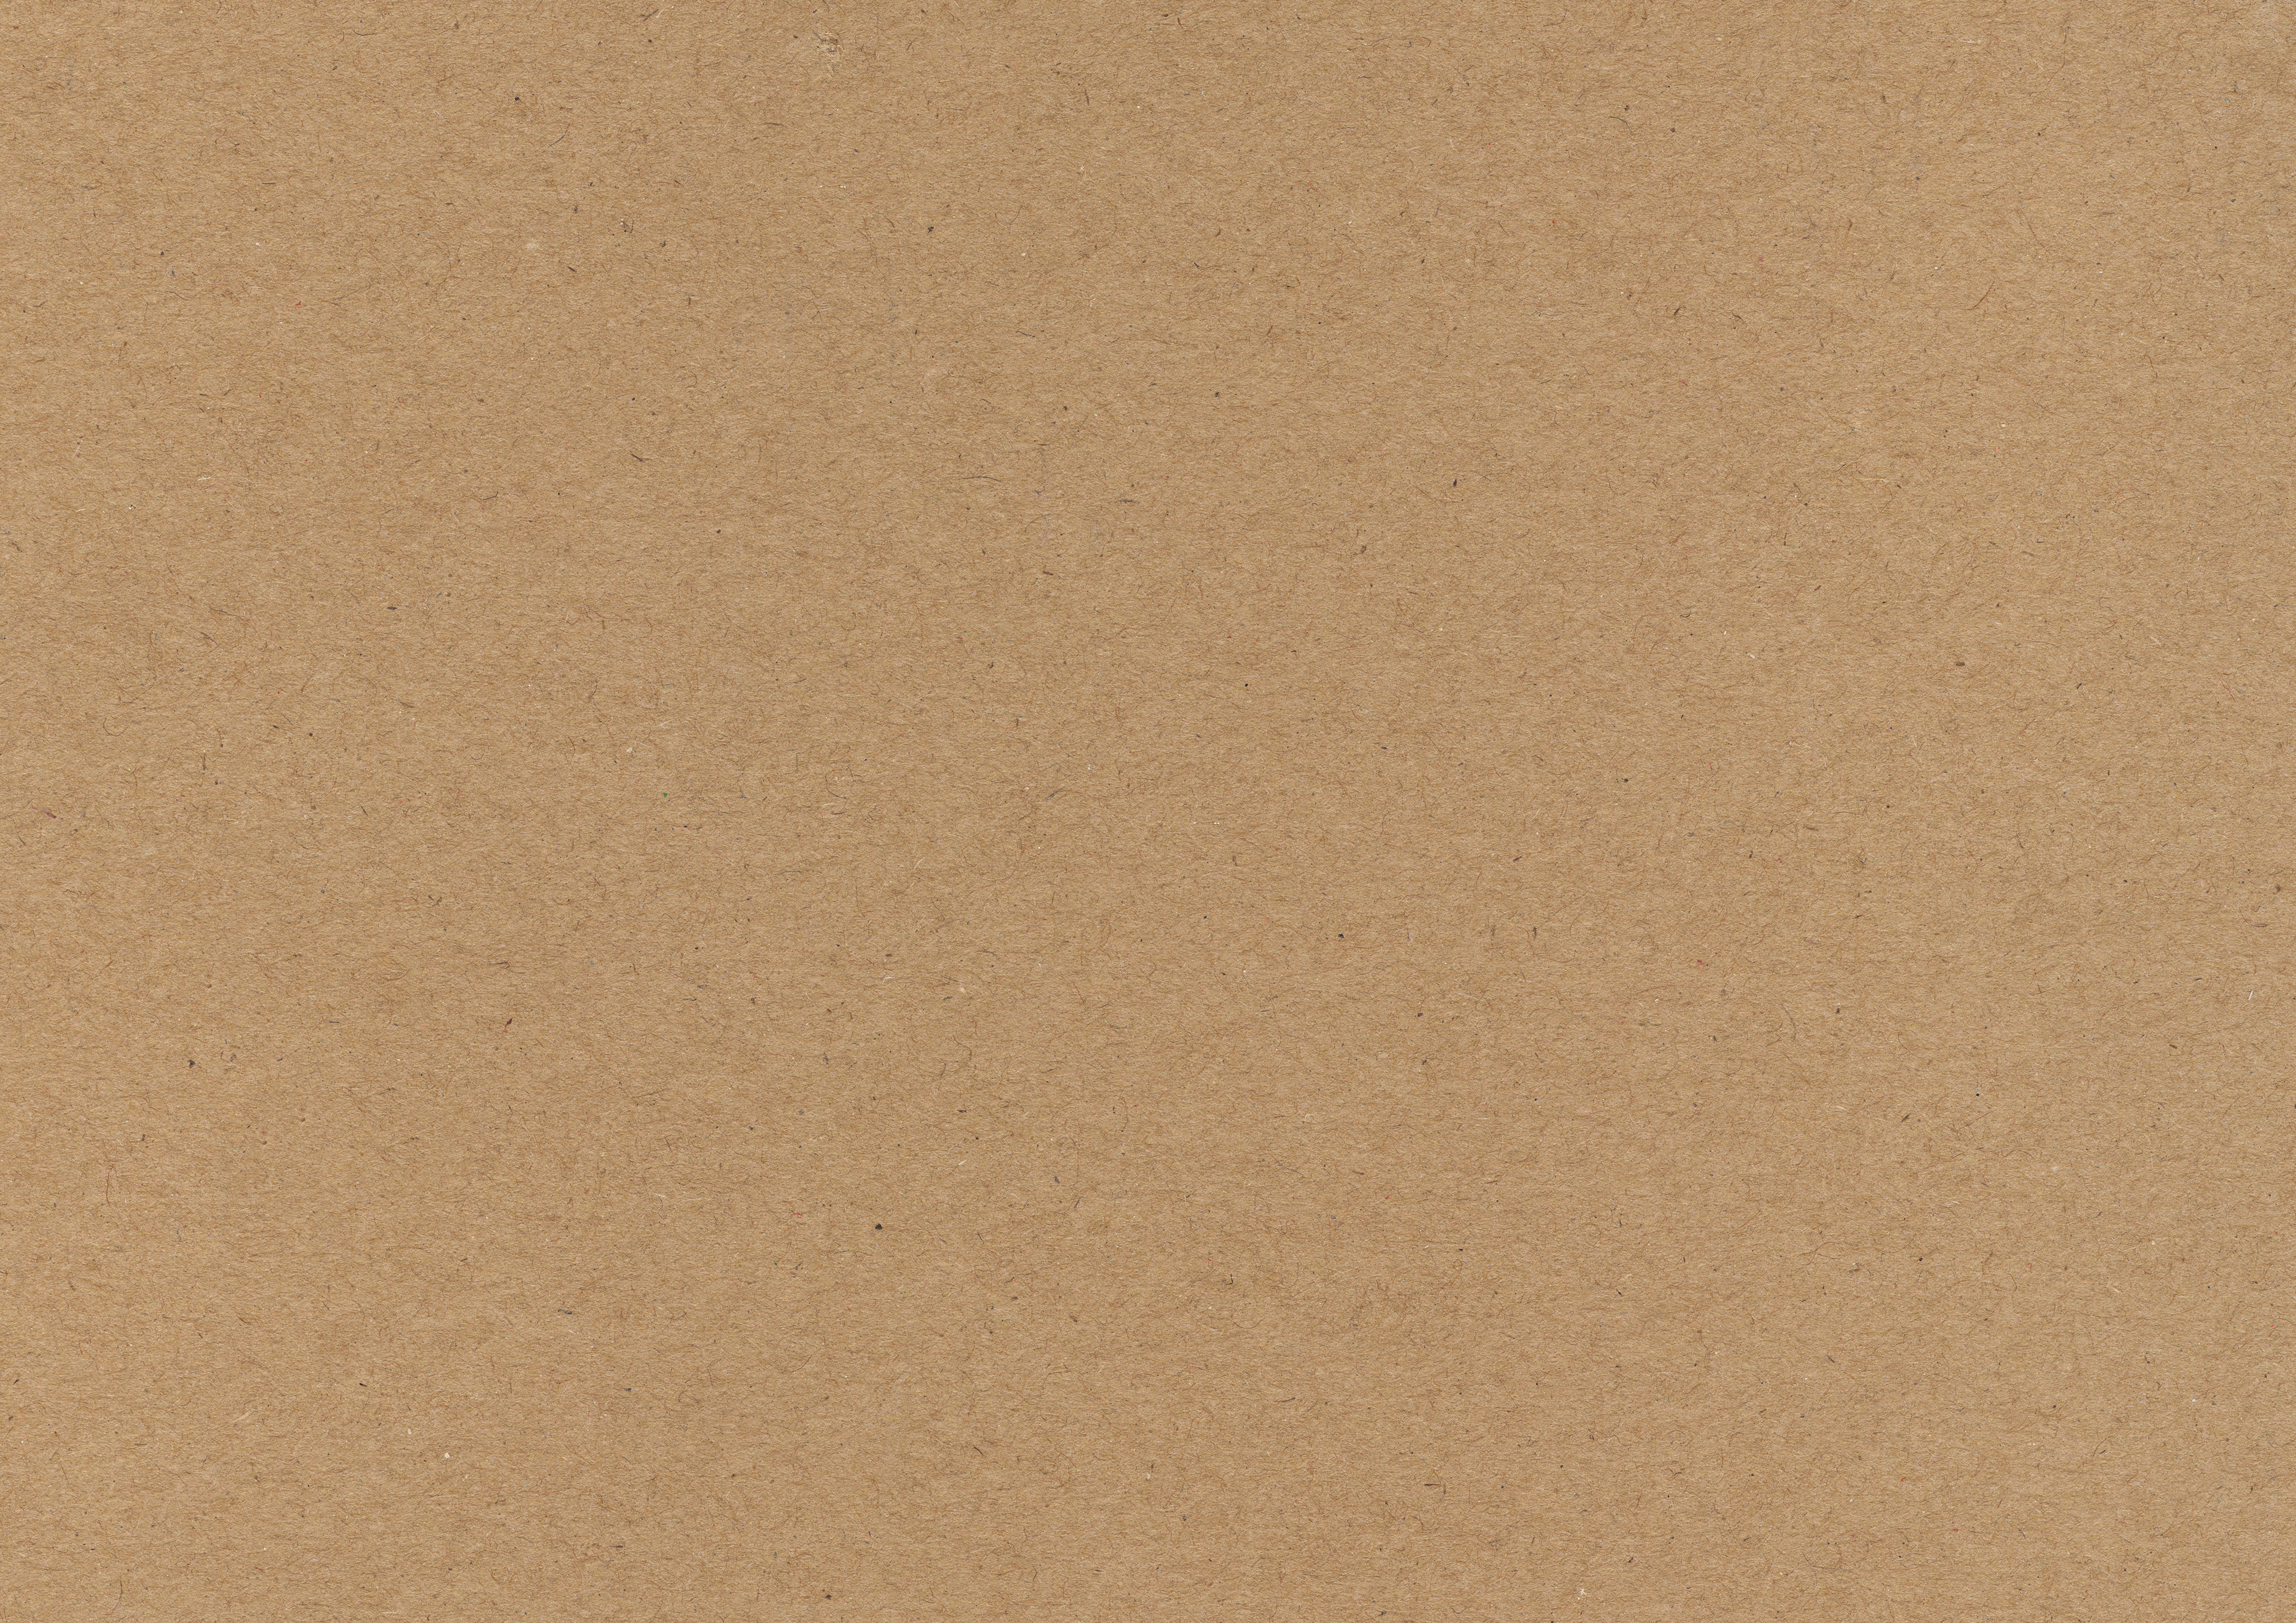 Texture Fabrik – Kraft and Recycled Paper Textures Vol.1 – 01